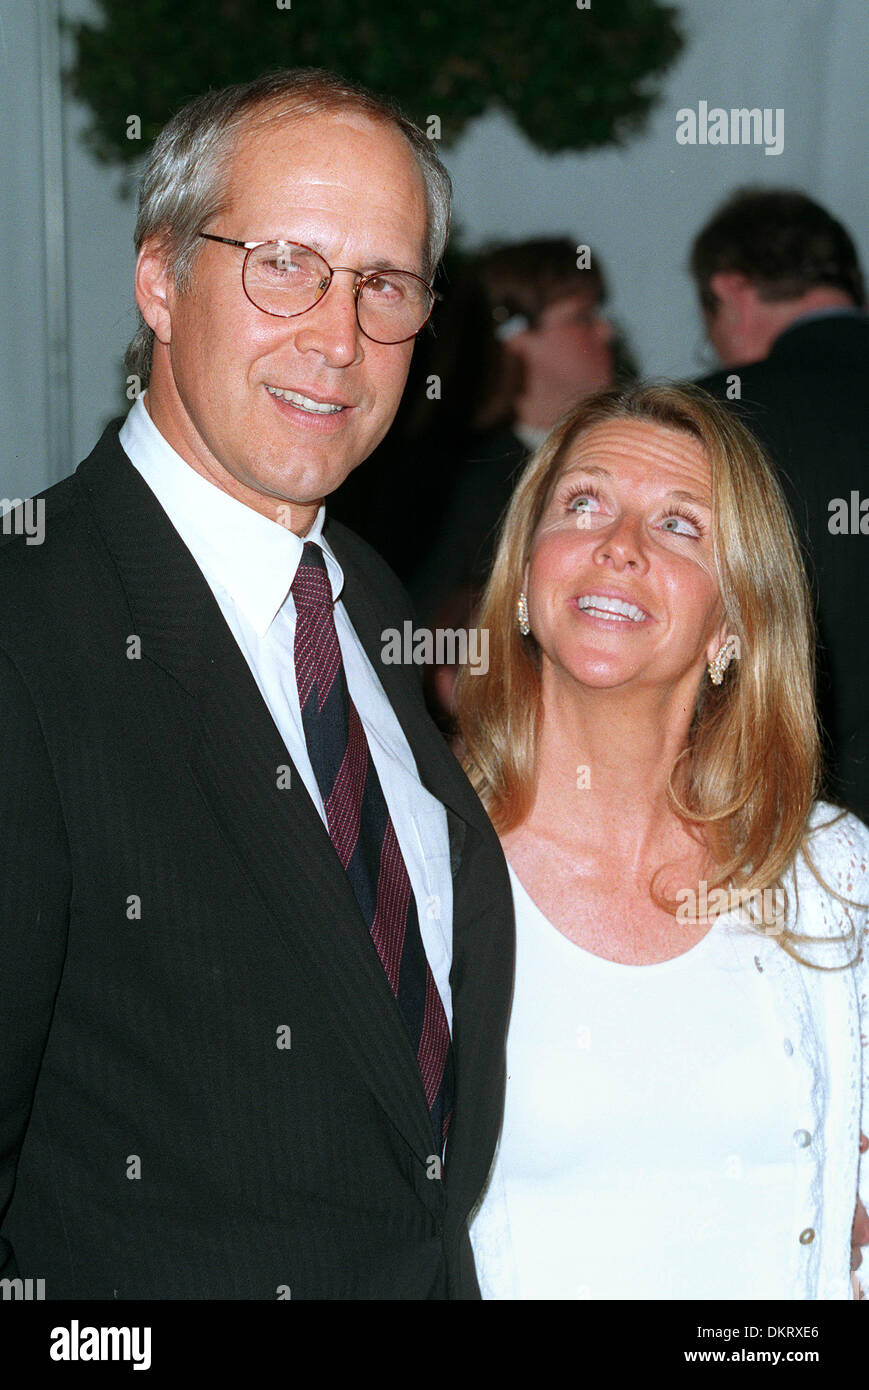 CHEVY CHASE & JAYNI CHASE.ACTOR & WIFE.07/12/2000.BD71E3C. Stock Photo